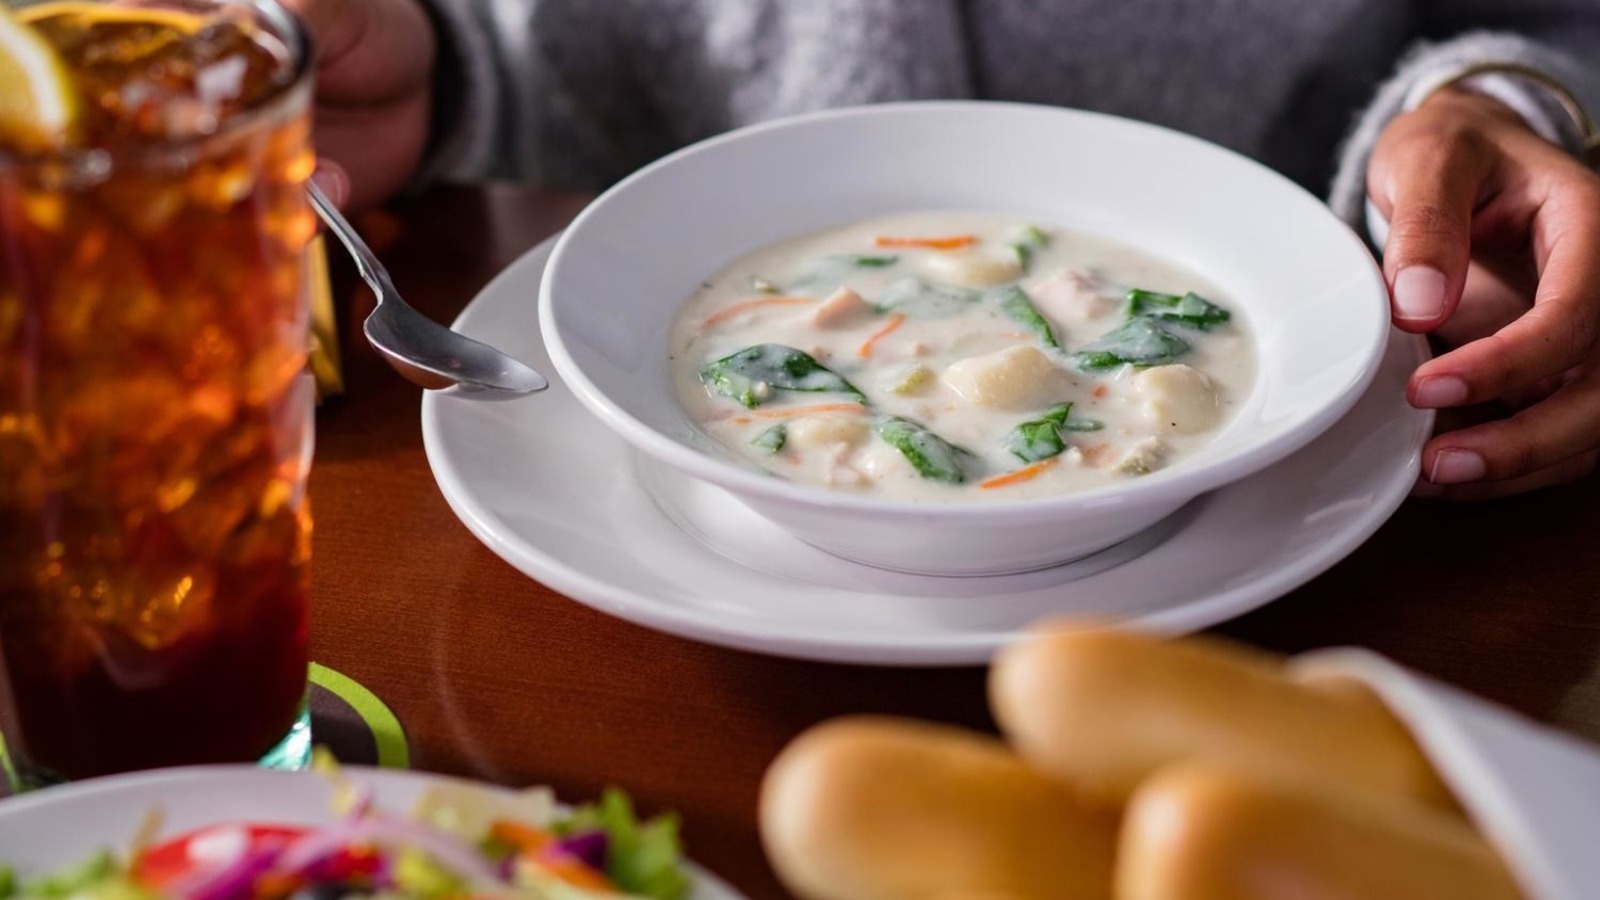 Olive Garden's Food Is Fresher Than You Thought - Mashed